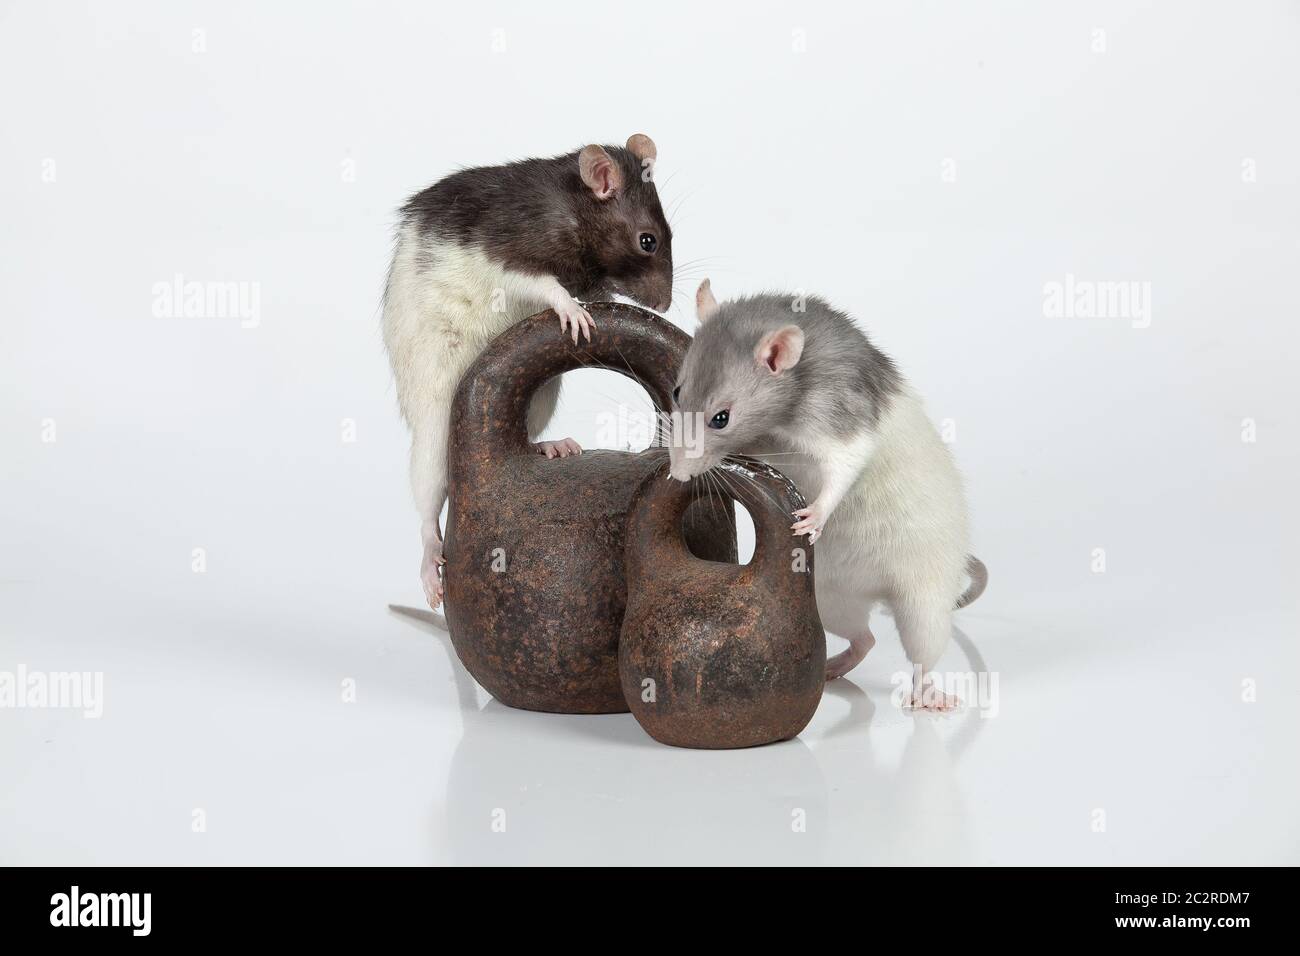 Rats And Old Iron Wights Stock Photo